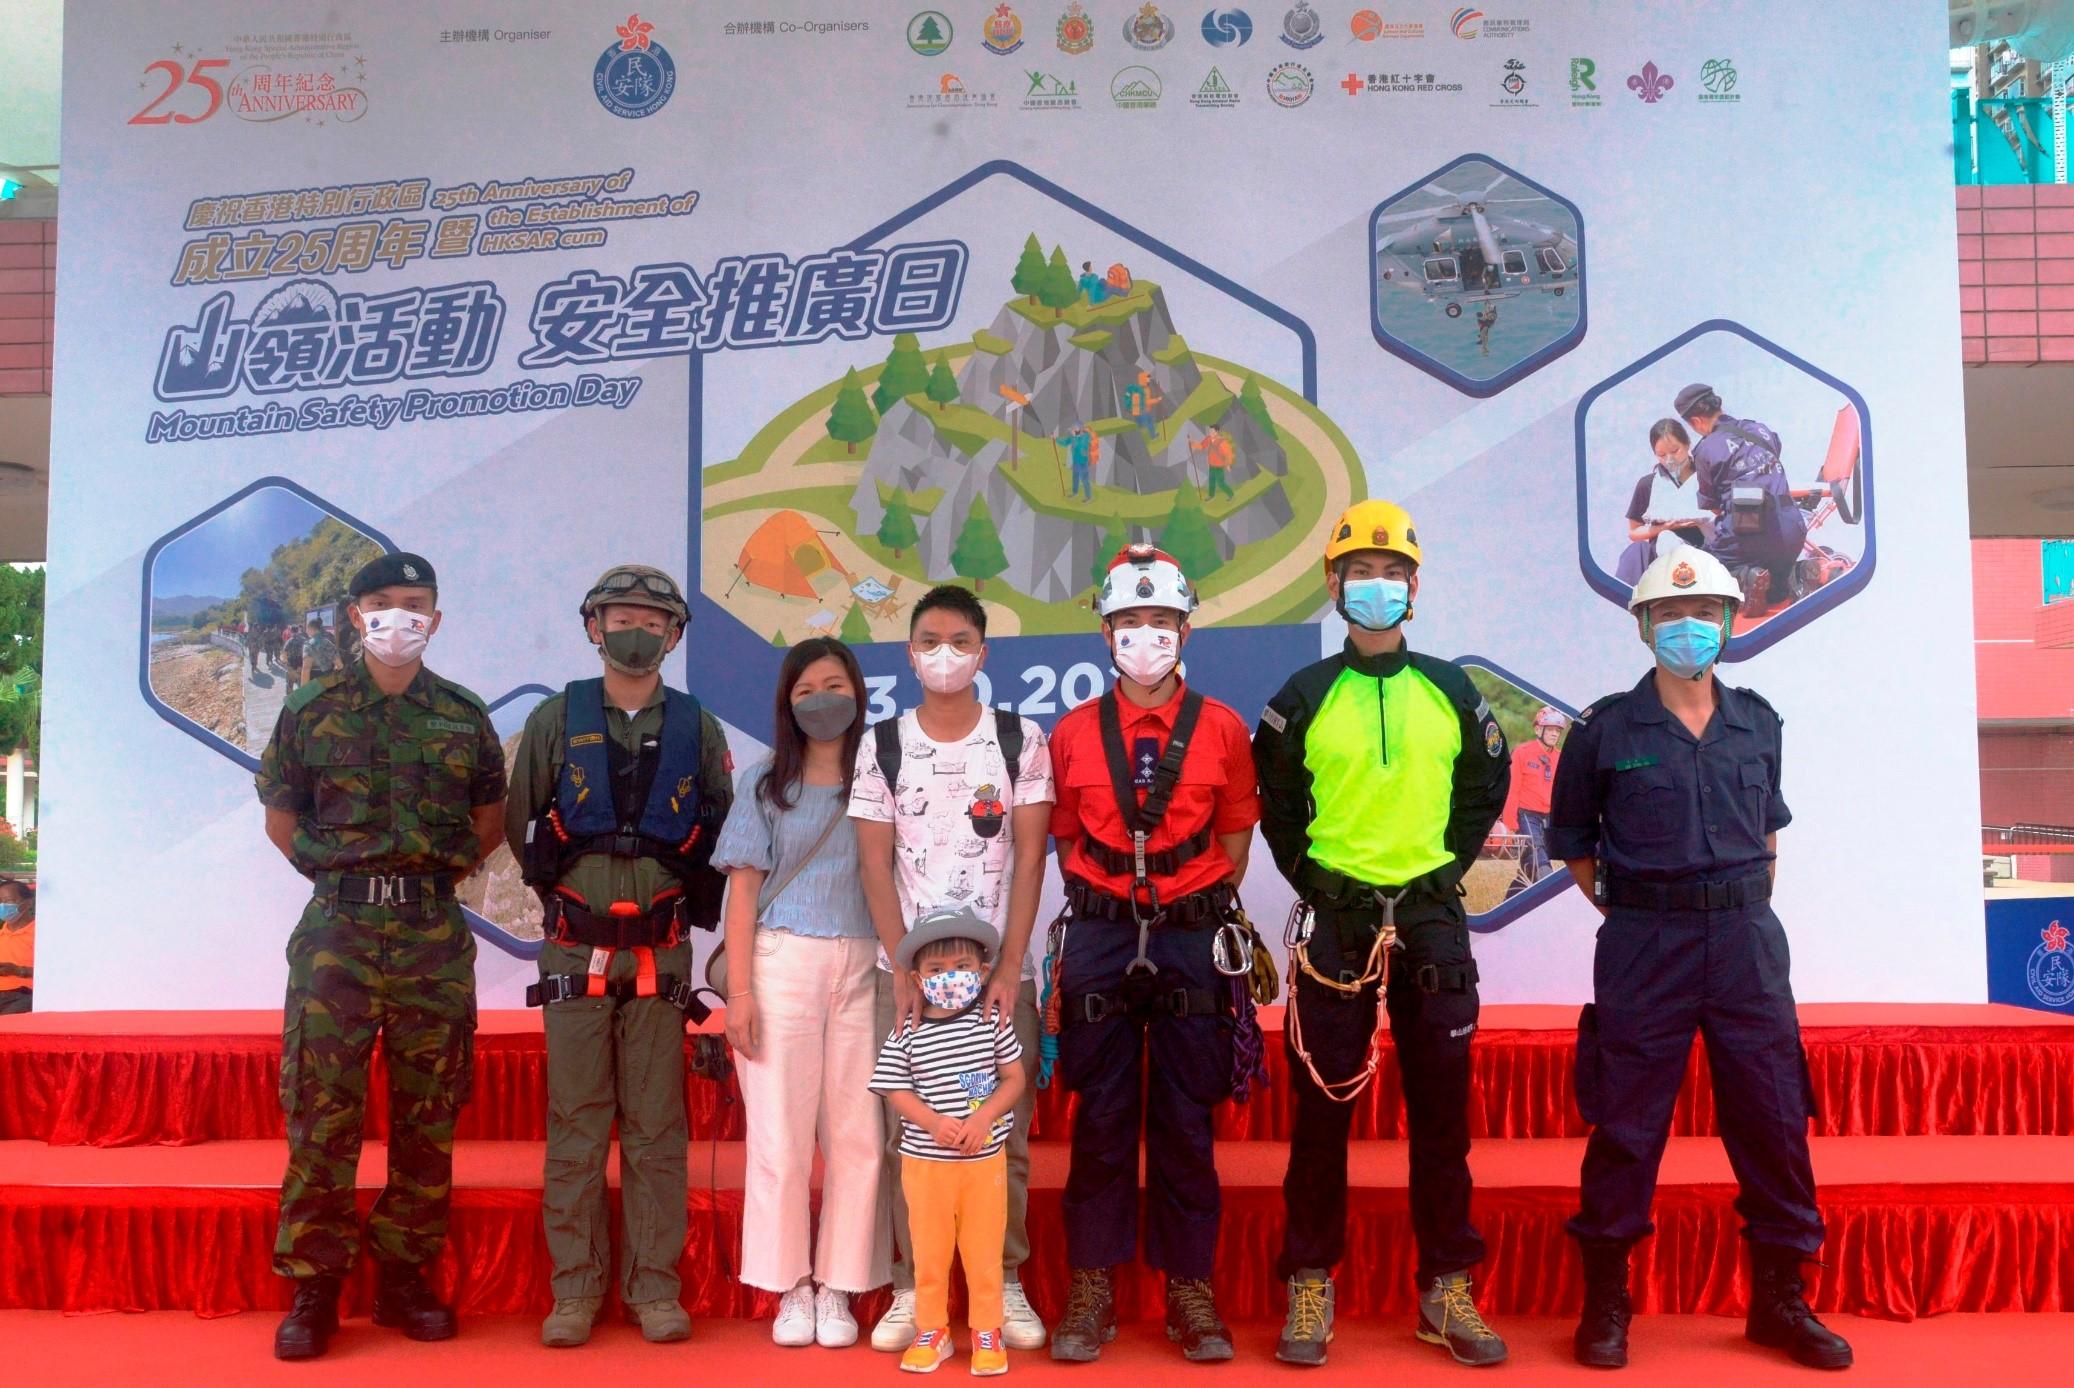 The Civil Aid Service held the 25th Anniversary of the Establishment of HKSAR cum Mountain Safety Promotion Day with various government departments and mountaineering organisations today (October 23) at Tuen Mun Cultural Square.  Photo shows members of the public posing with rescue personnel.